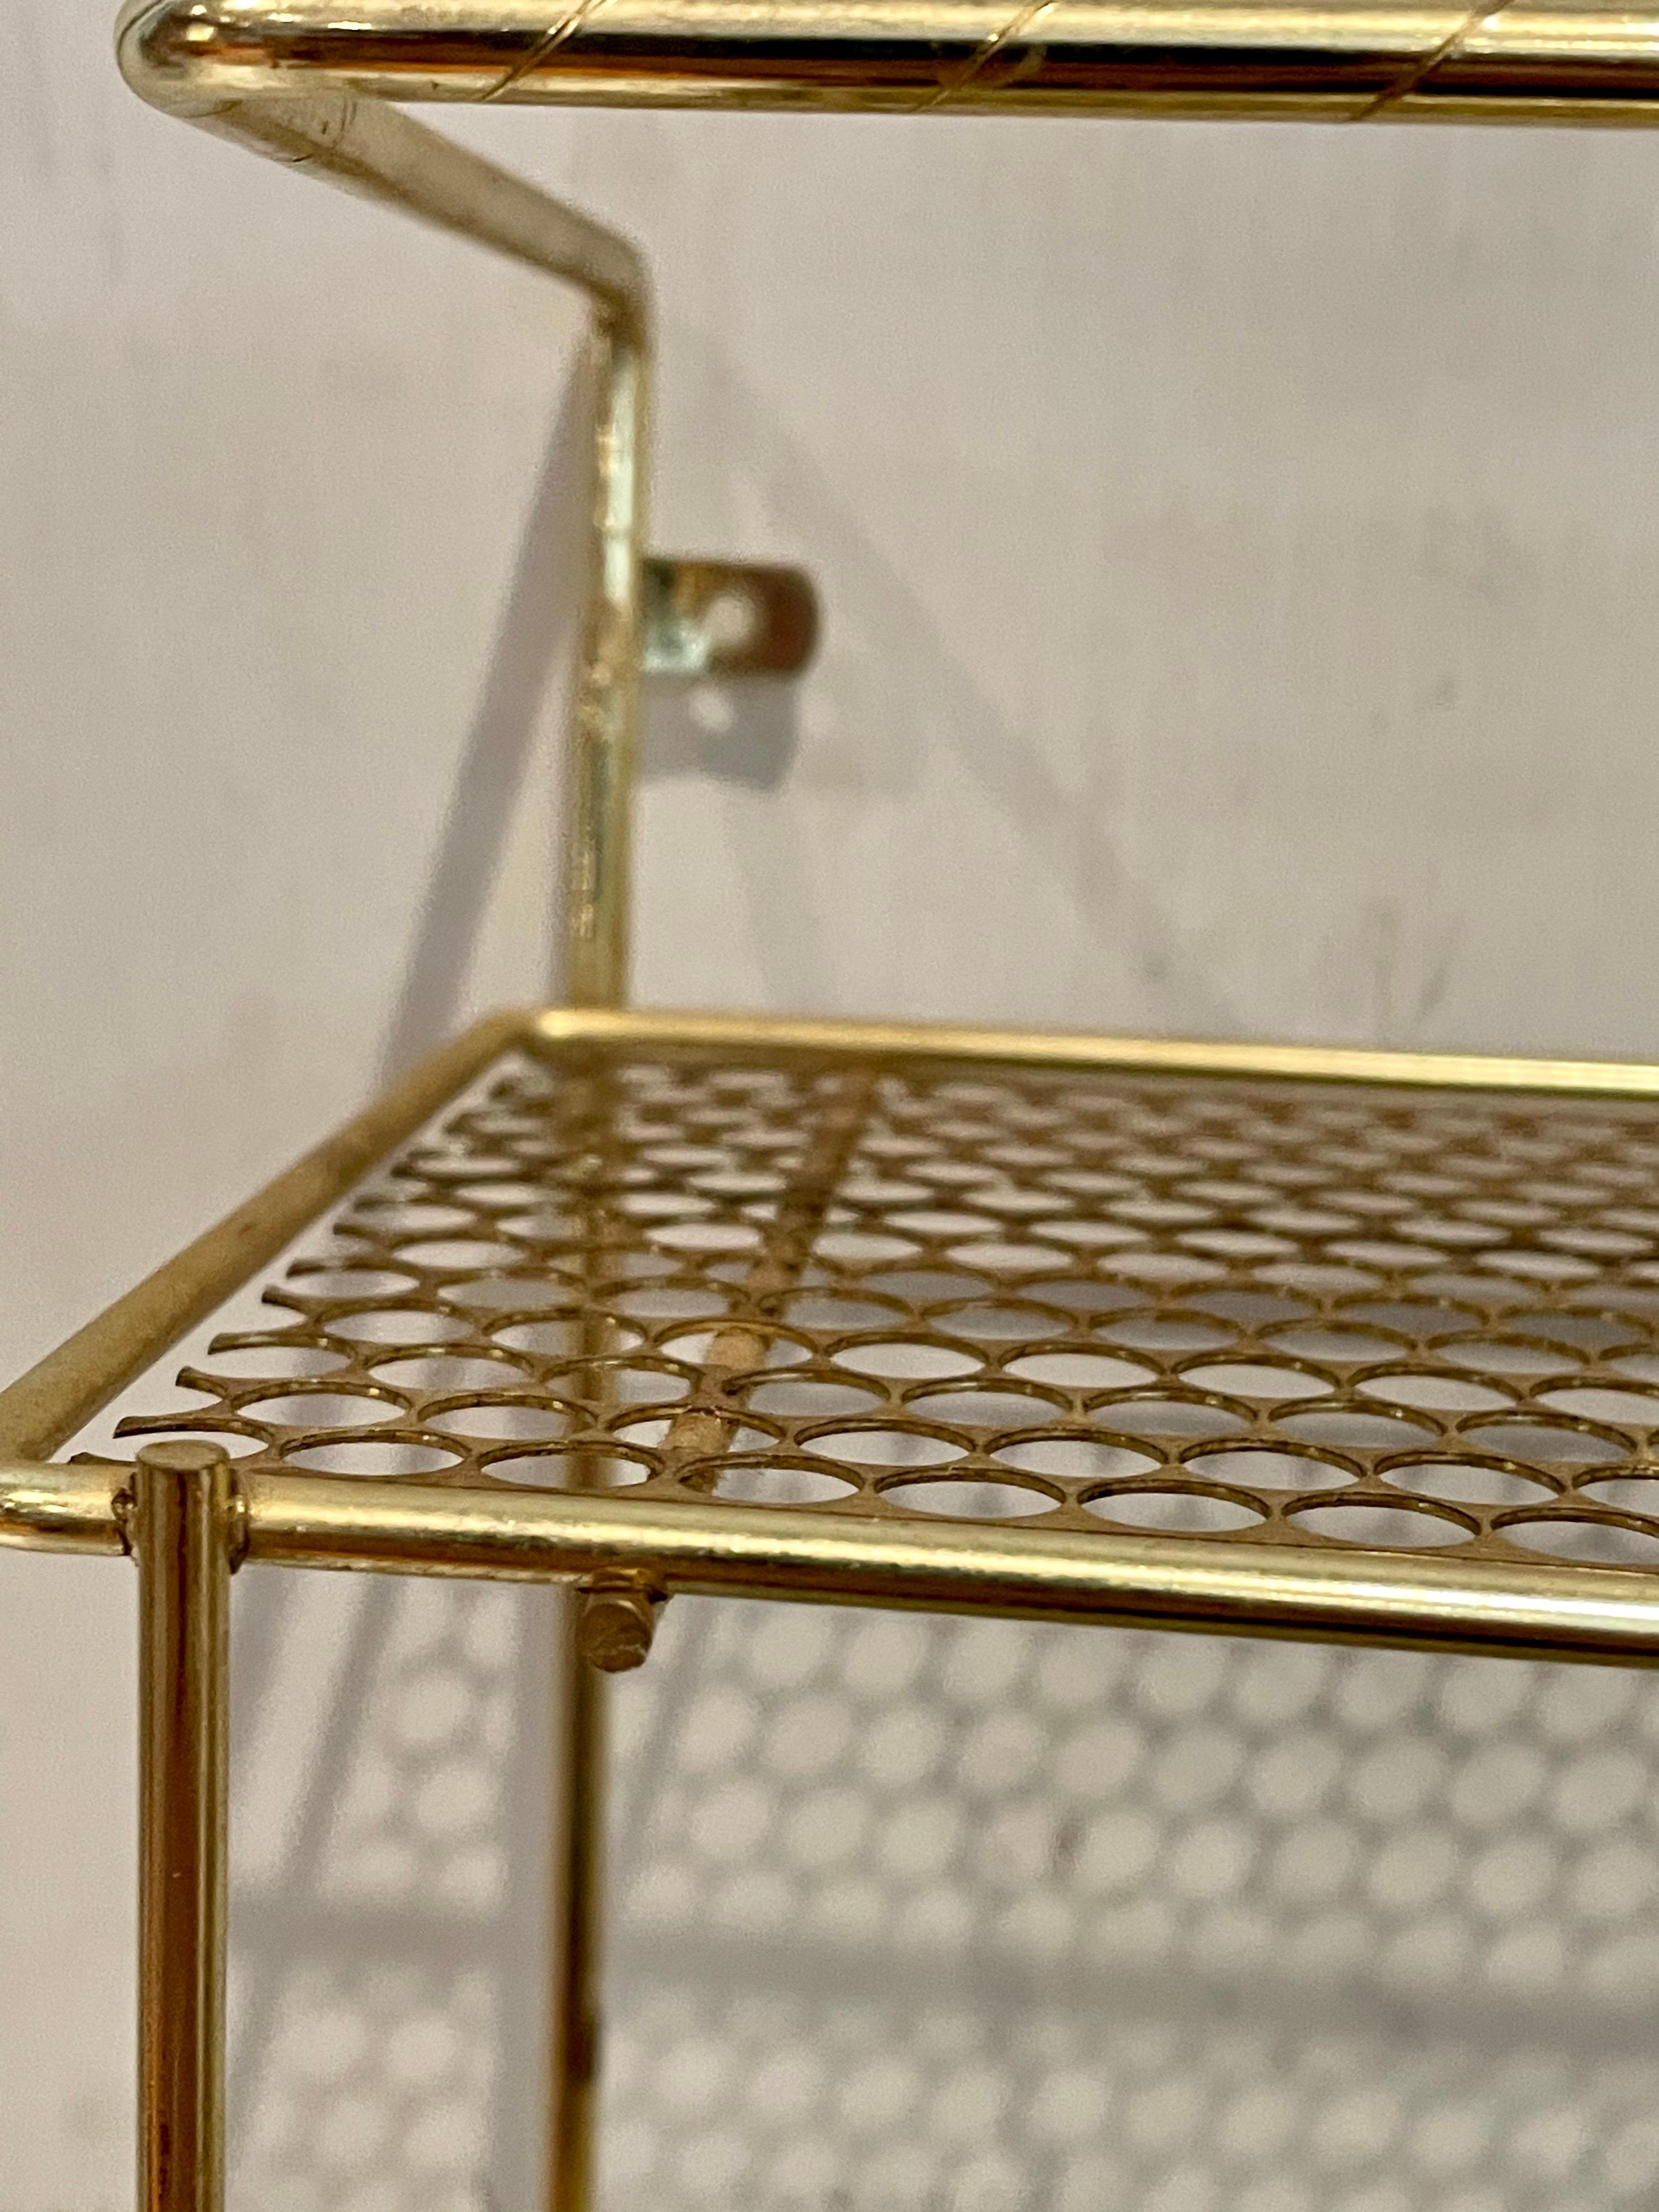 Mid-Century Modern Richard Galef Wire Perforated Metal Wall Towel Rack in Brass Finish